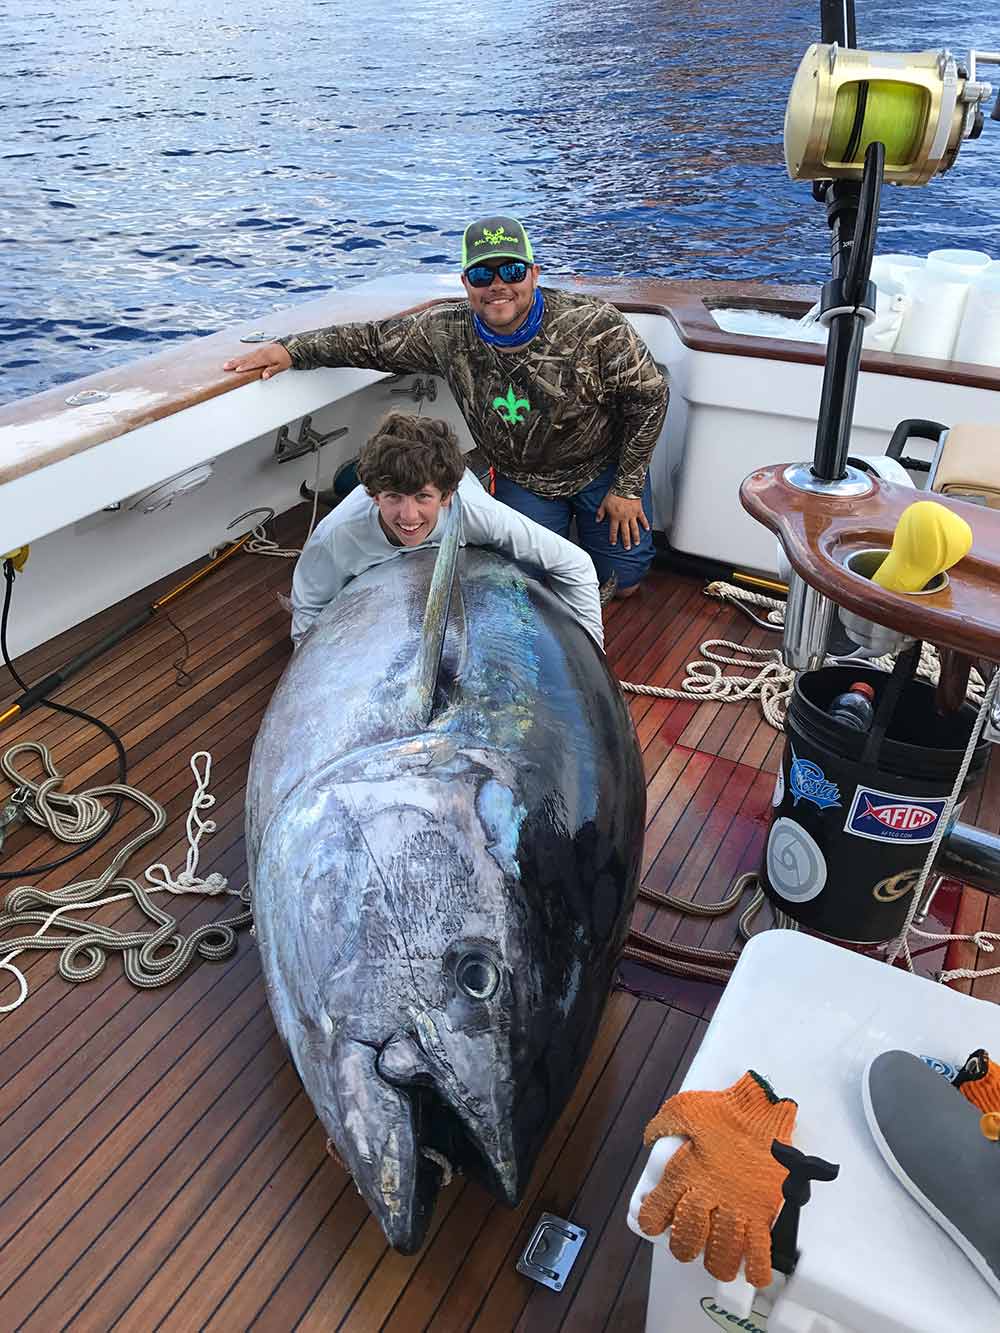 Teen Lands Giant Bluefin Tuna in Gulf of Mexico